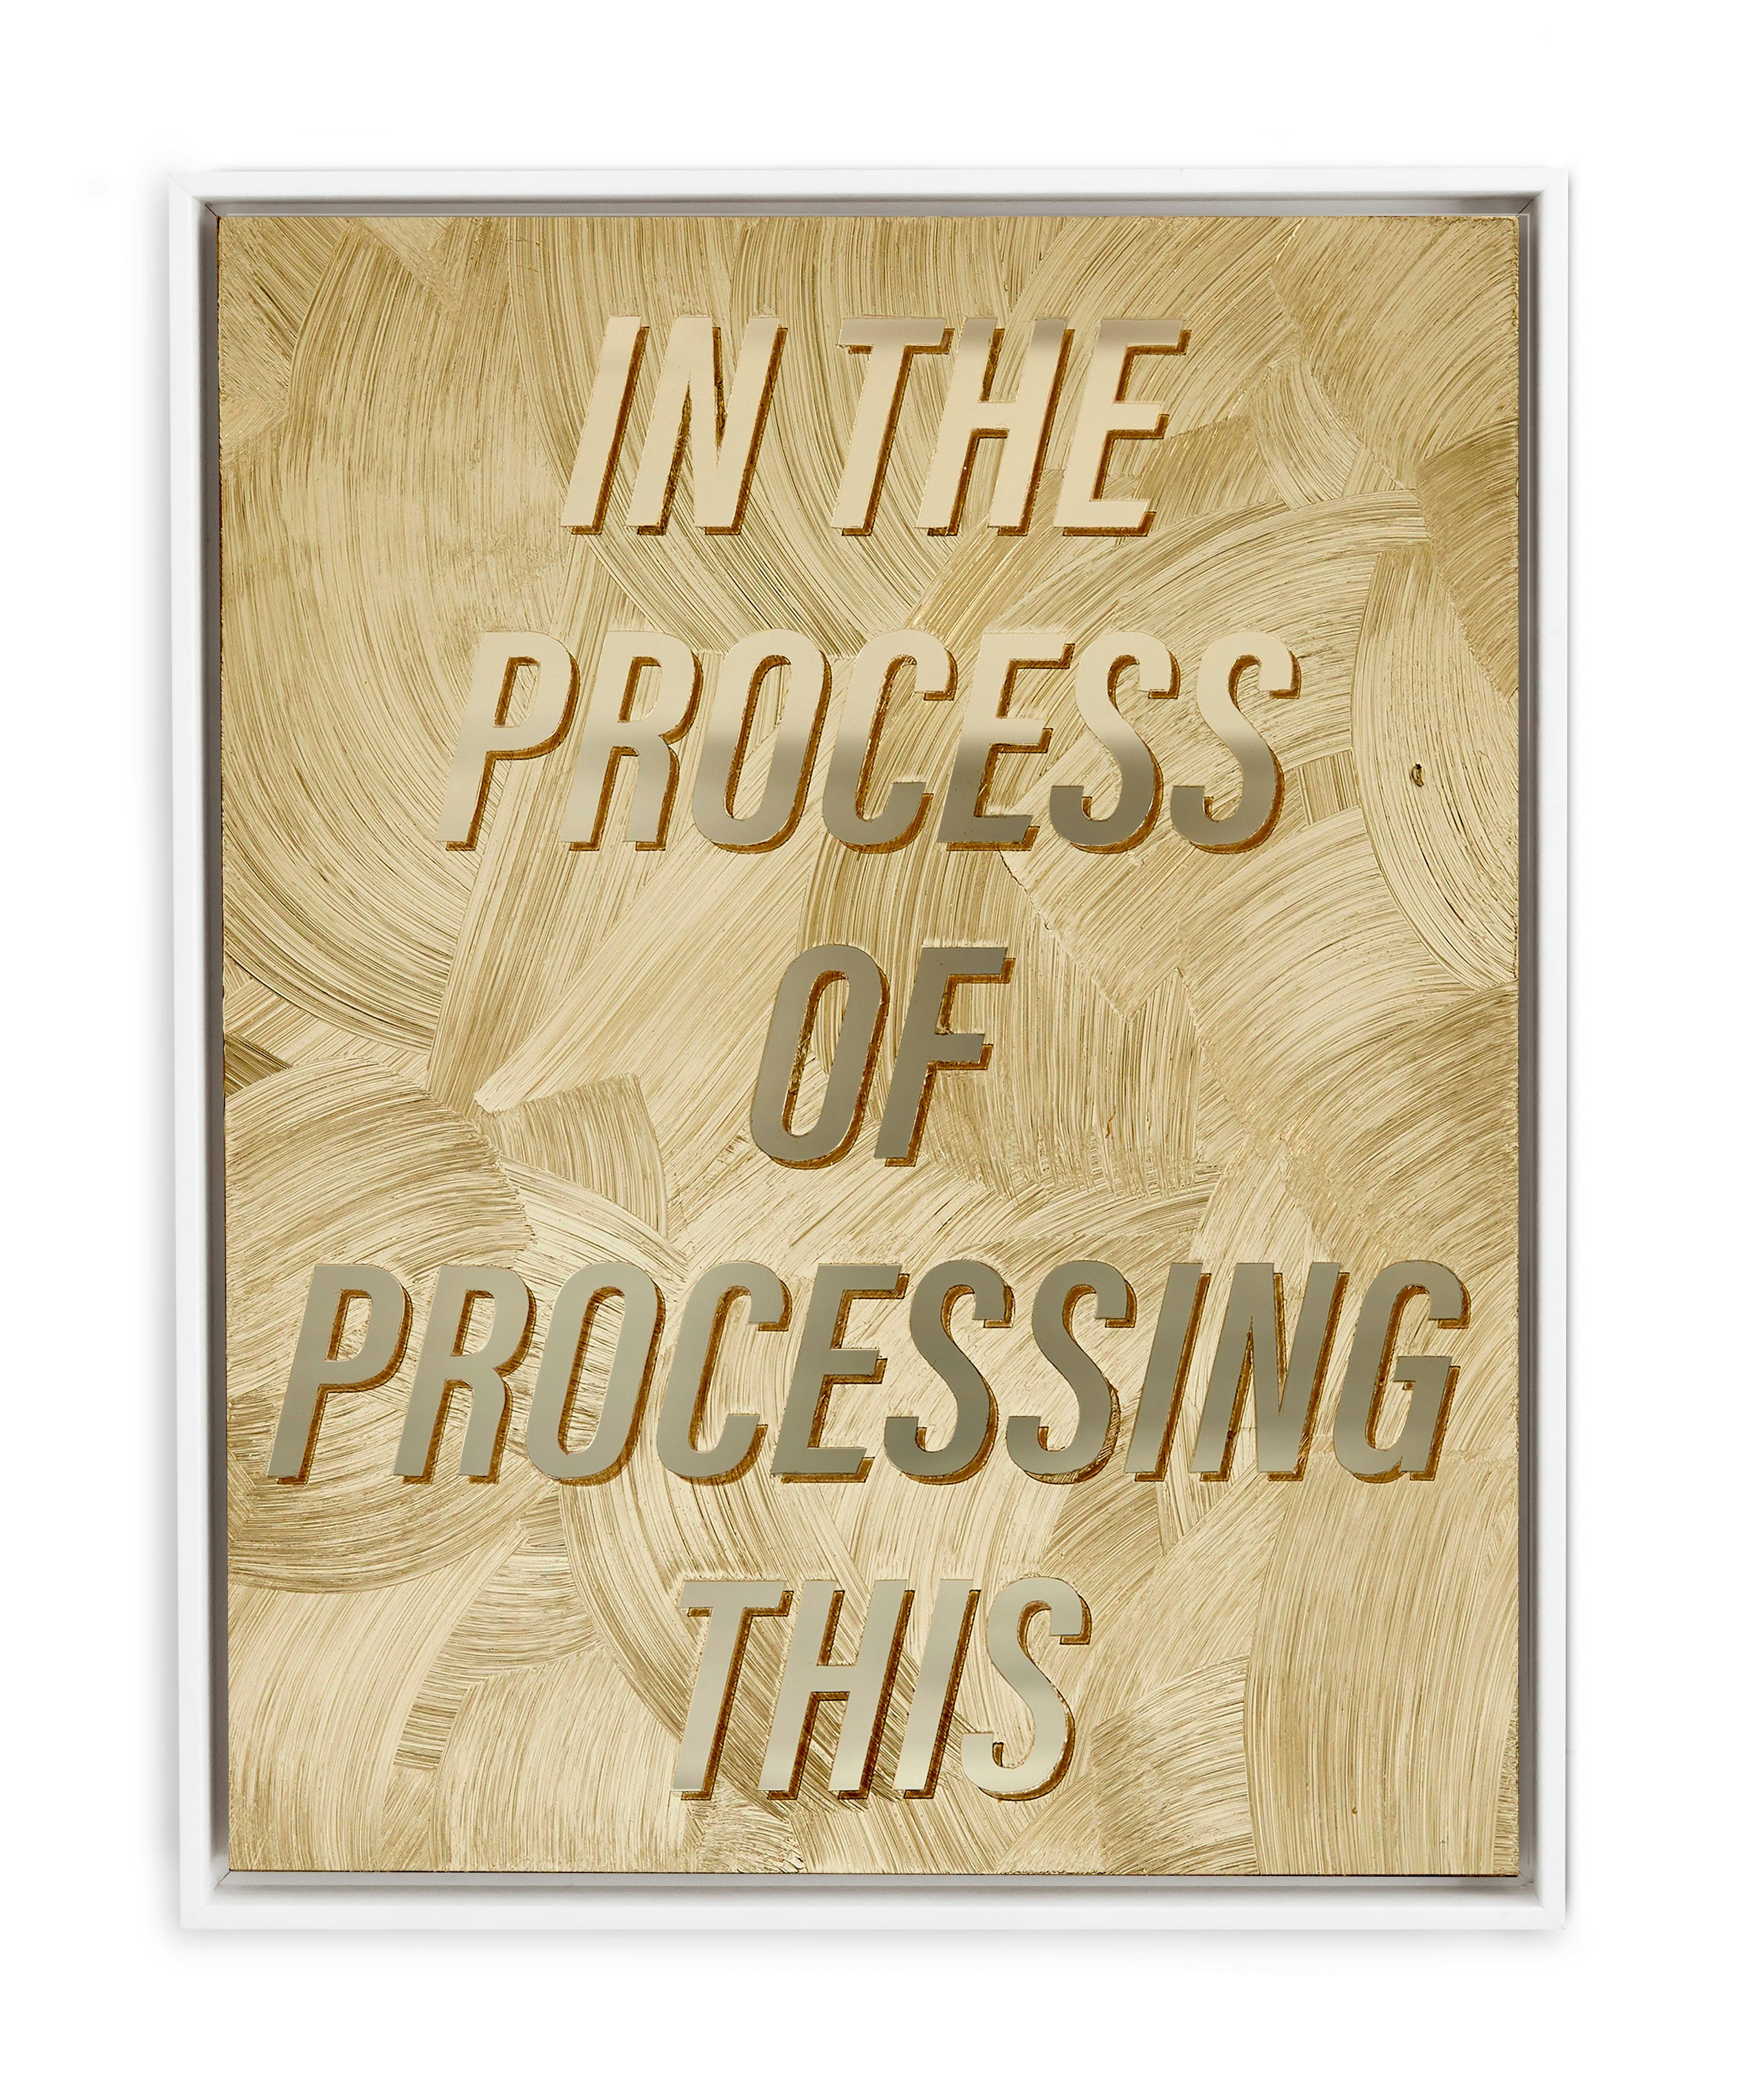 Ben Skinner - In The Process Of - Mixed Media